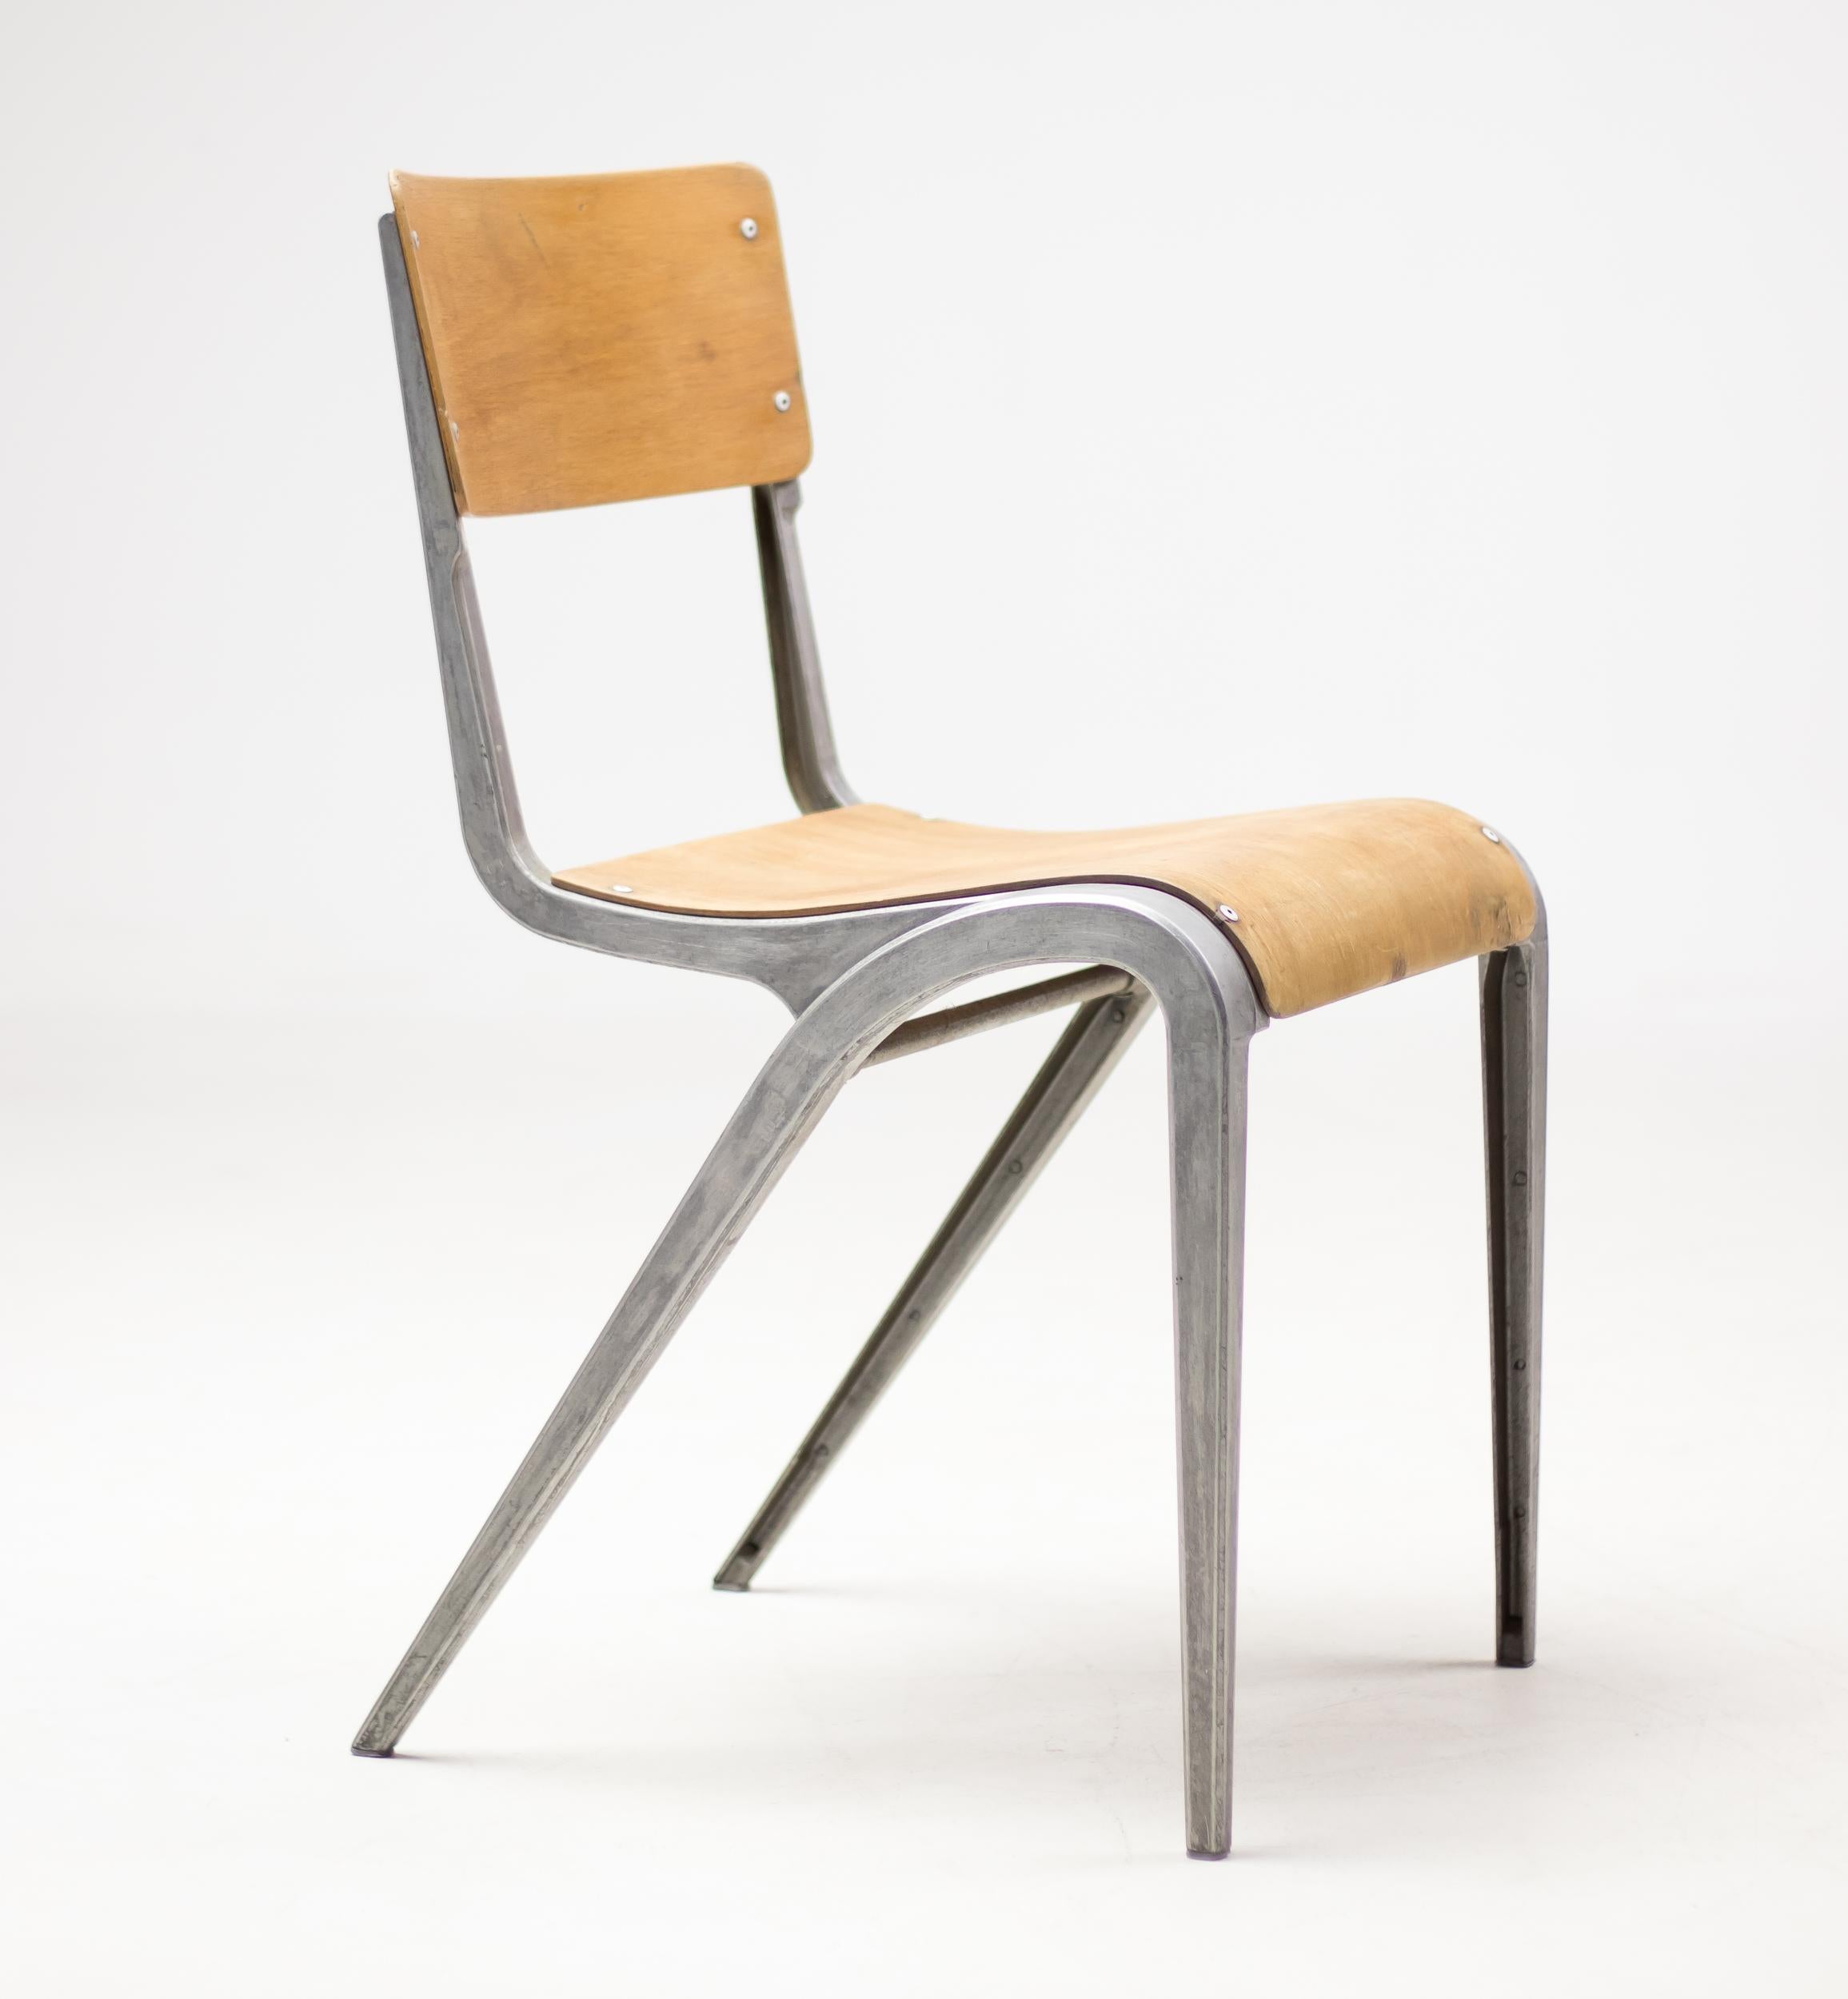 Cast aluminum side chair by James Leonard for Esavian with bent plywood seat and back.